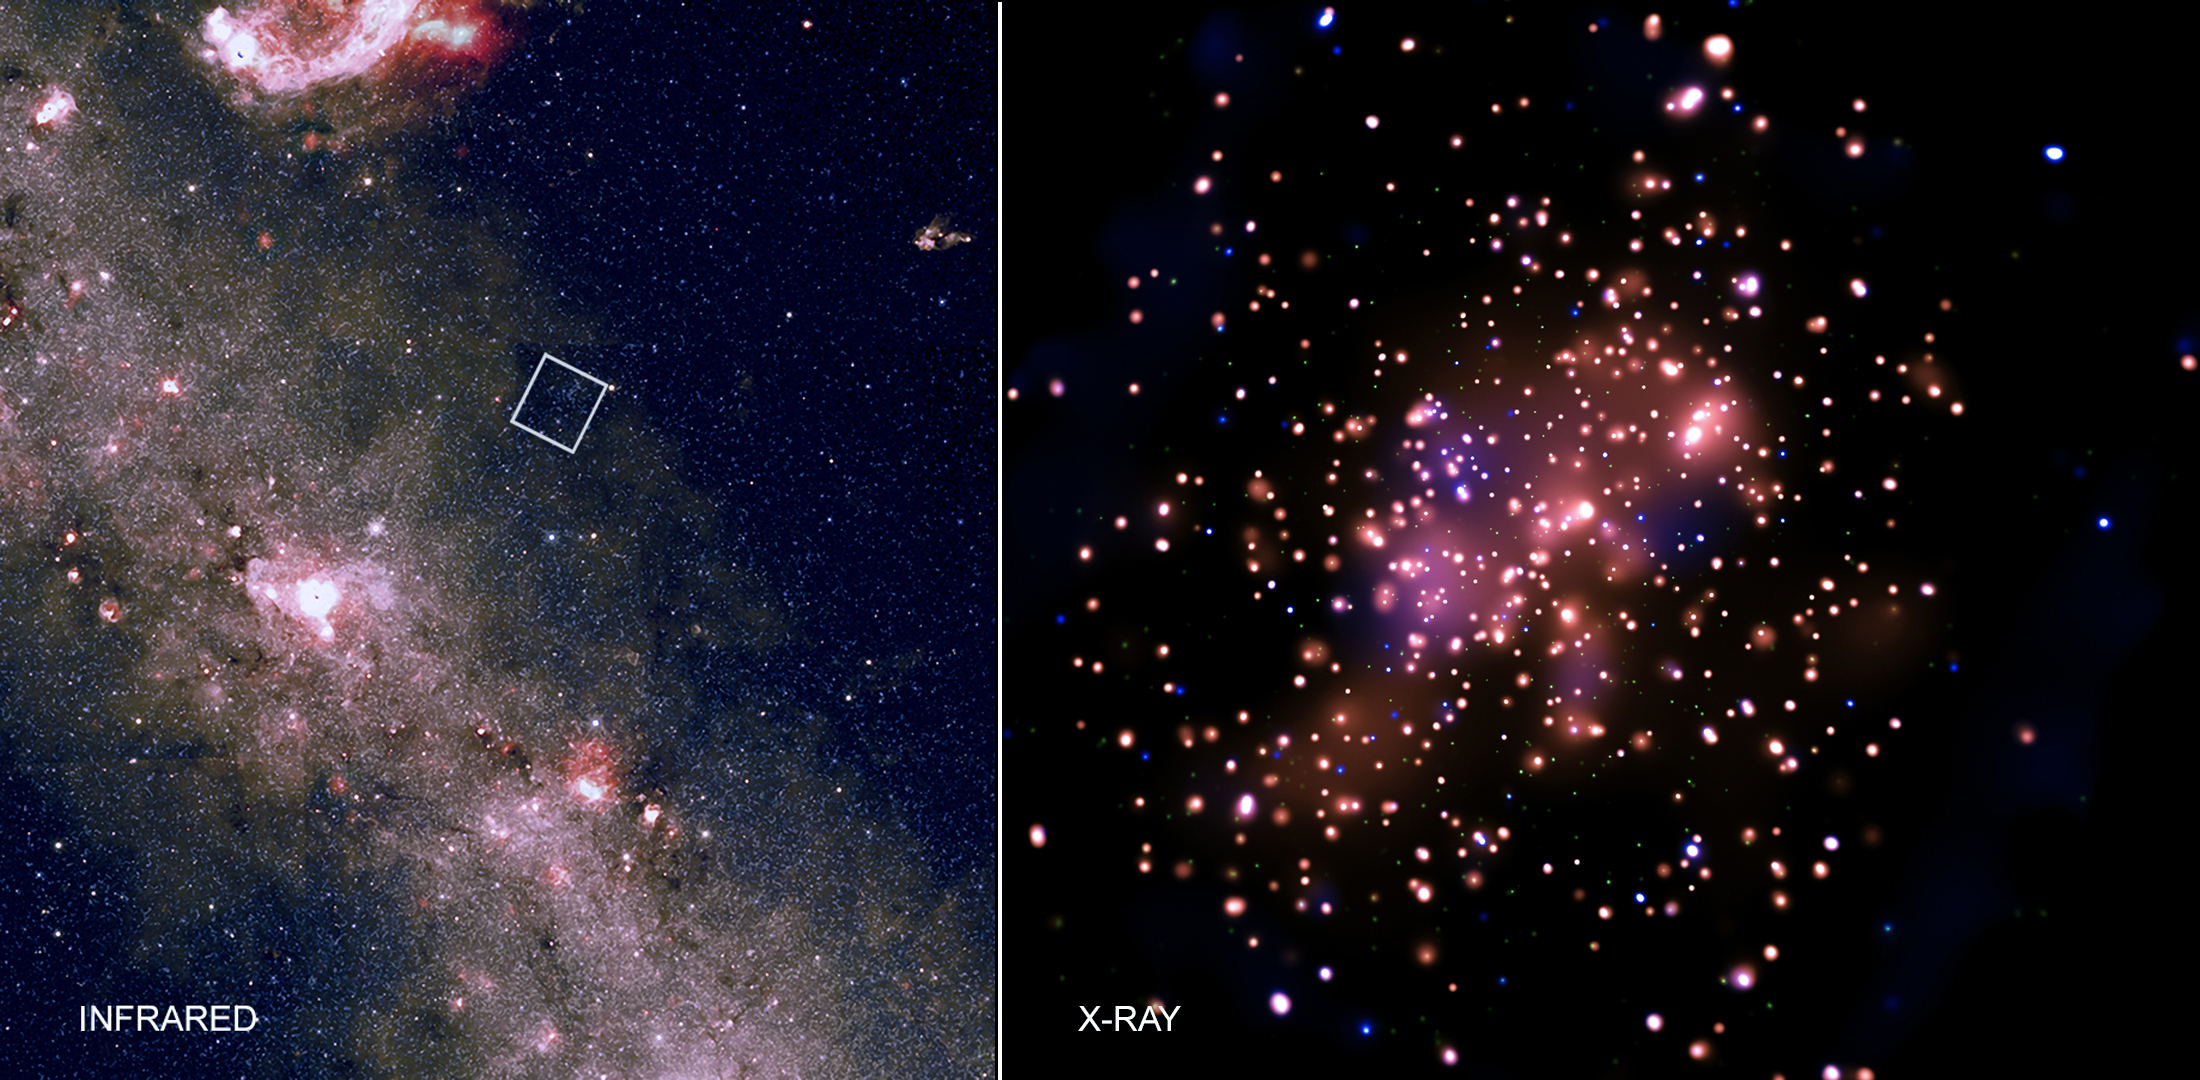 Infrared image is ~5 degrees across (about 452 light years); Right: Xray image is ~16 arcmin across (about 24 light years). Credit: X-ray: NASA/CXC/Univ. of Valparaiso/M. Kuhn et al; IR: NASA/JPL/WISE